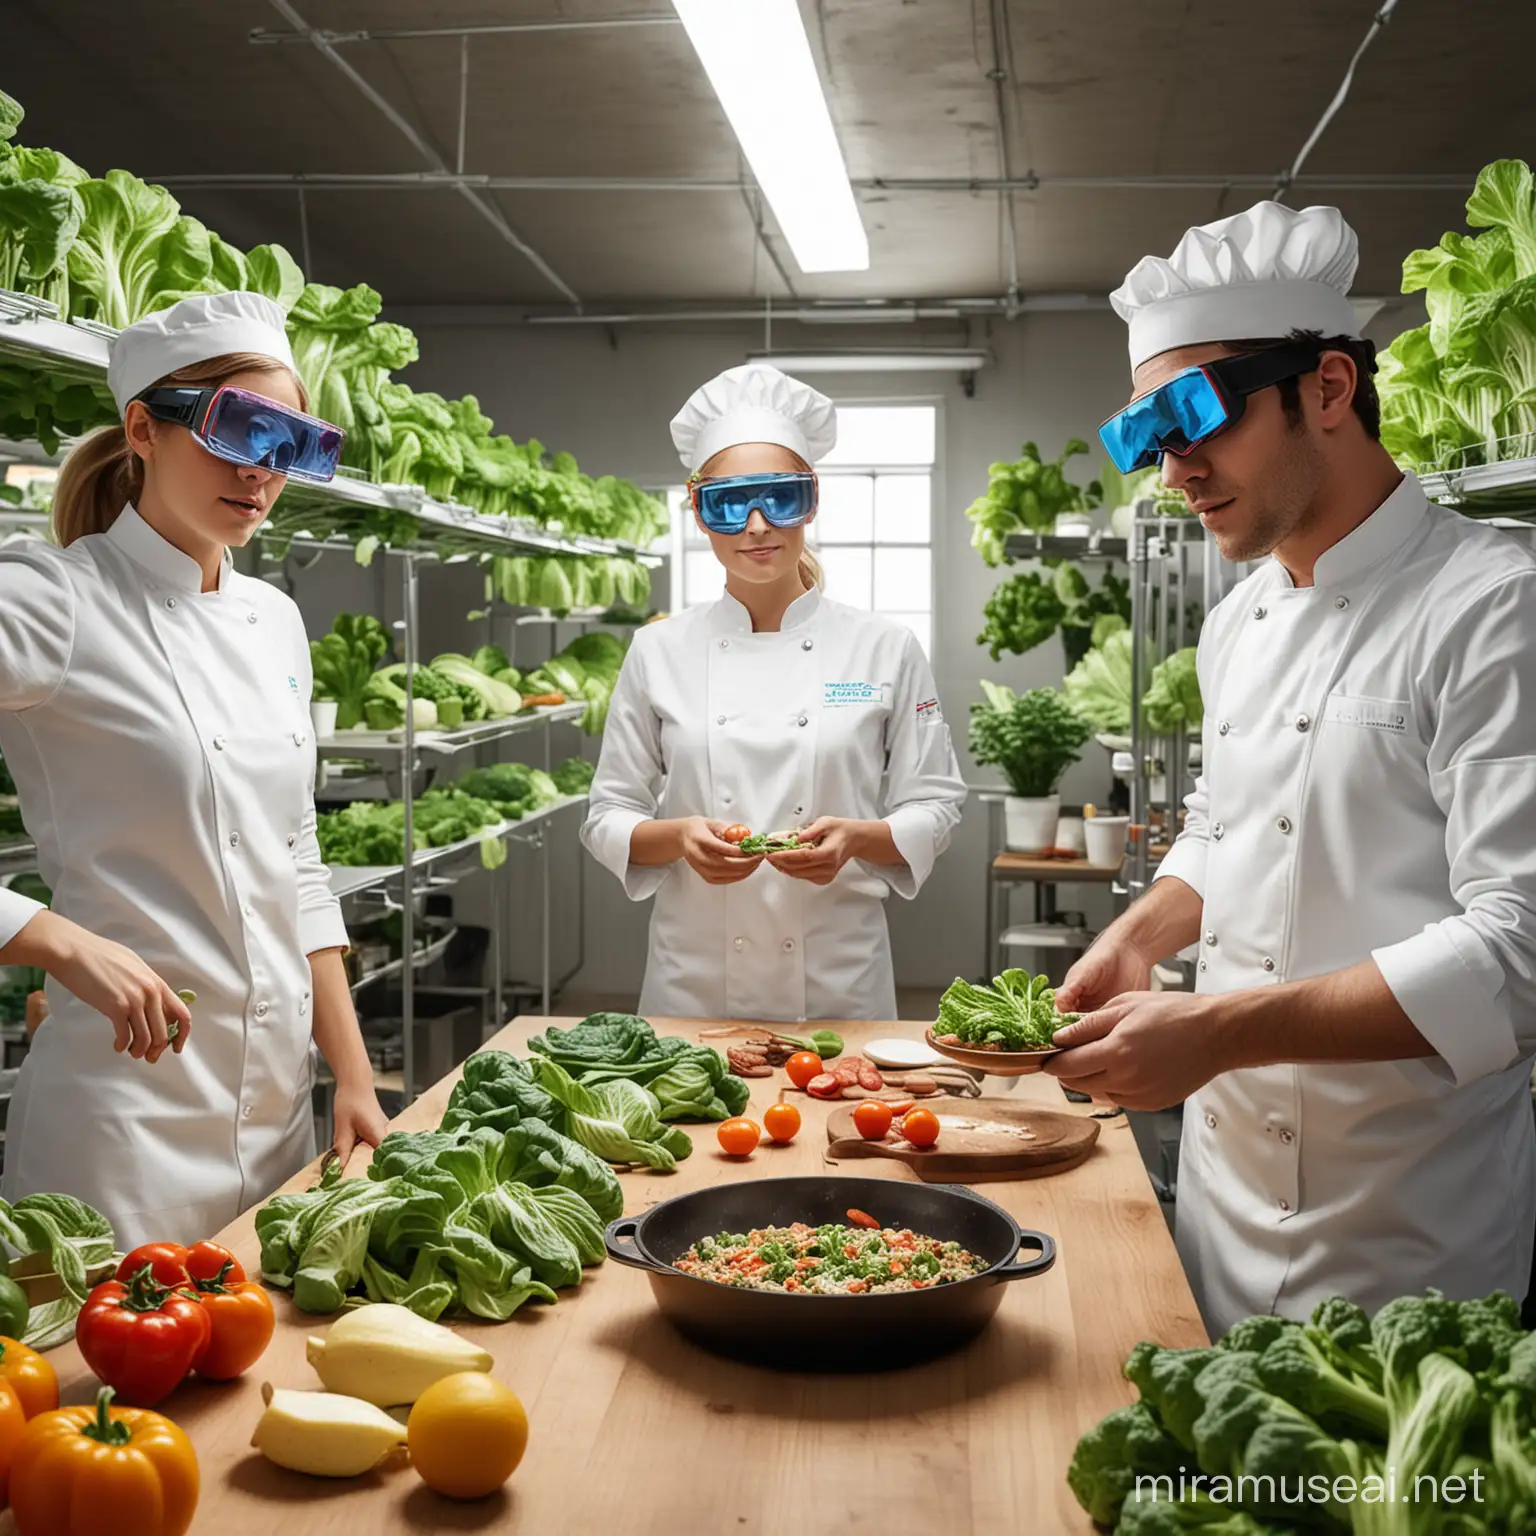 Virtual Cooking Experience with 3D Glasses and Vertical Farm Backdrop